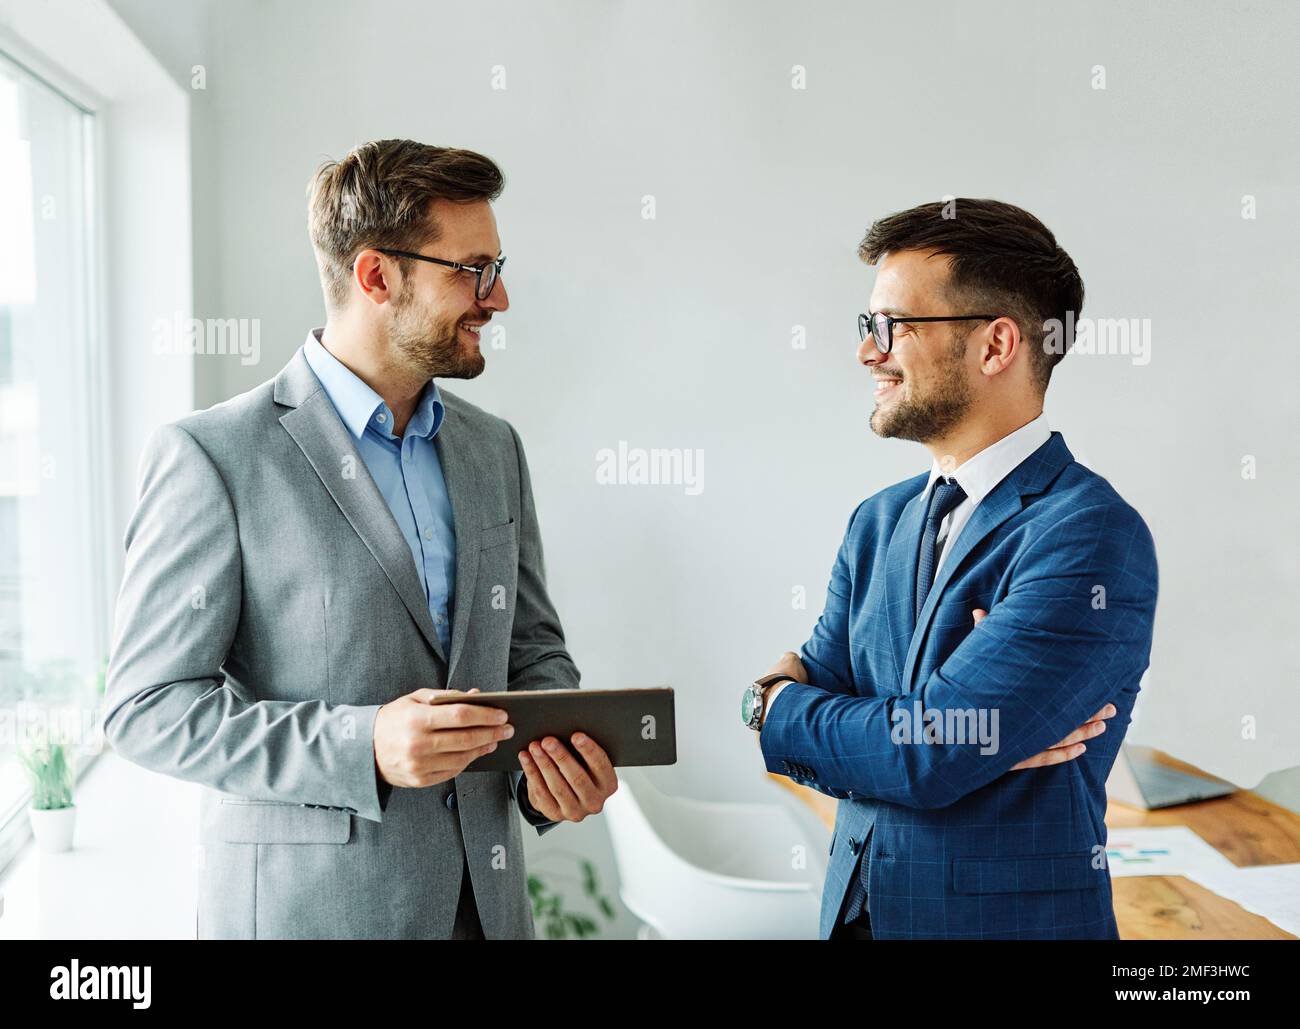 young business people businesspeople businessman meeting office teamwork success corporate discussion tablet computer Stock Photo